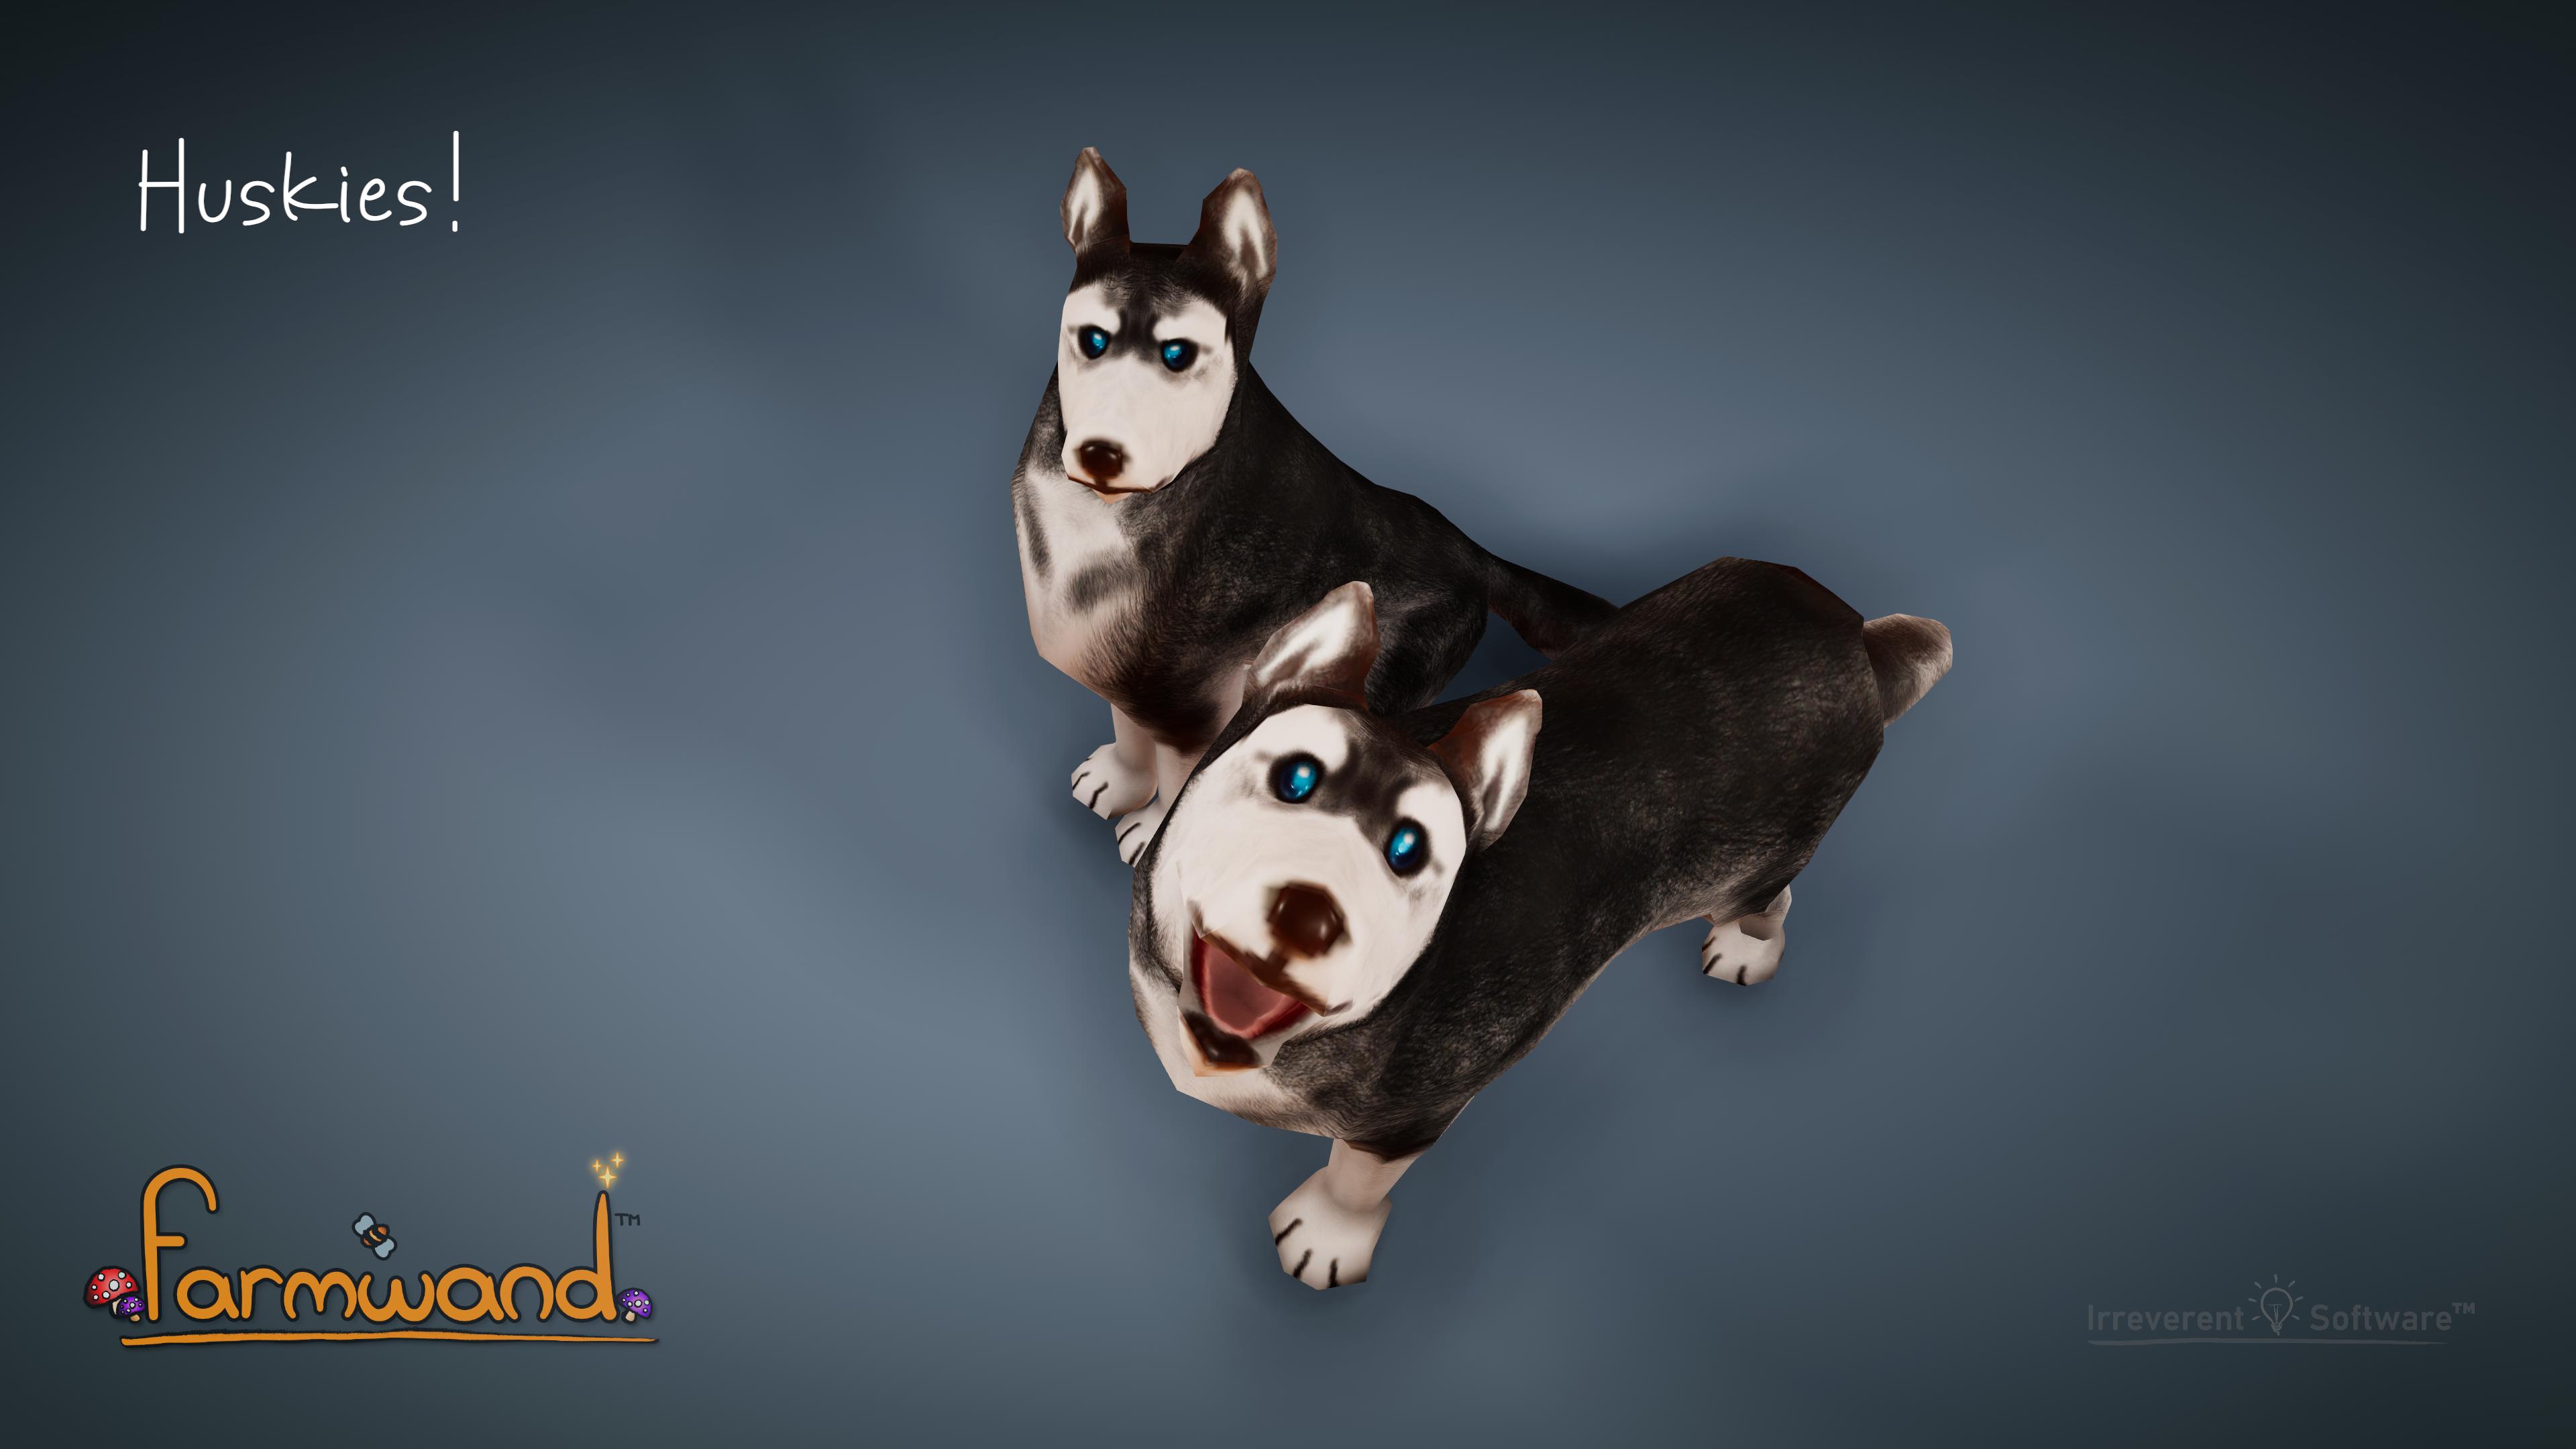 Huskies with attitude are coming to Farmwand!